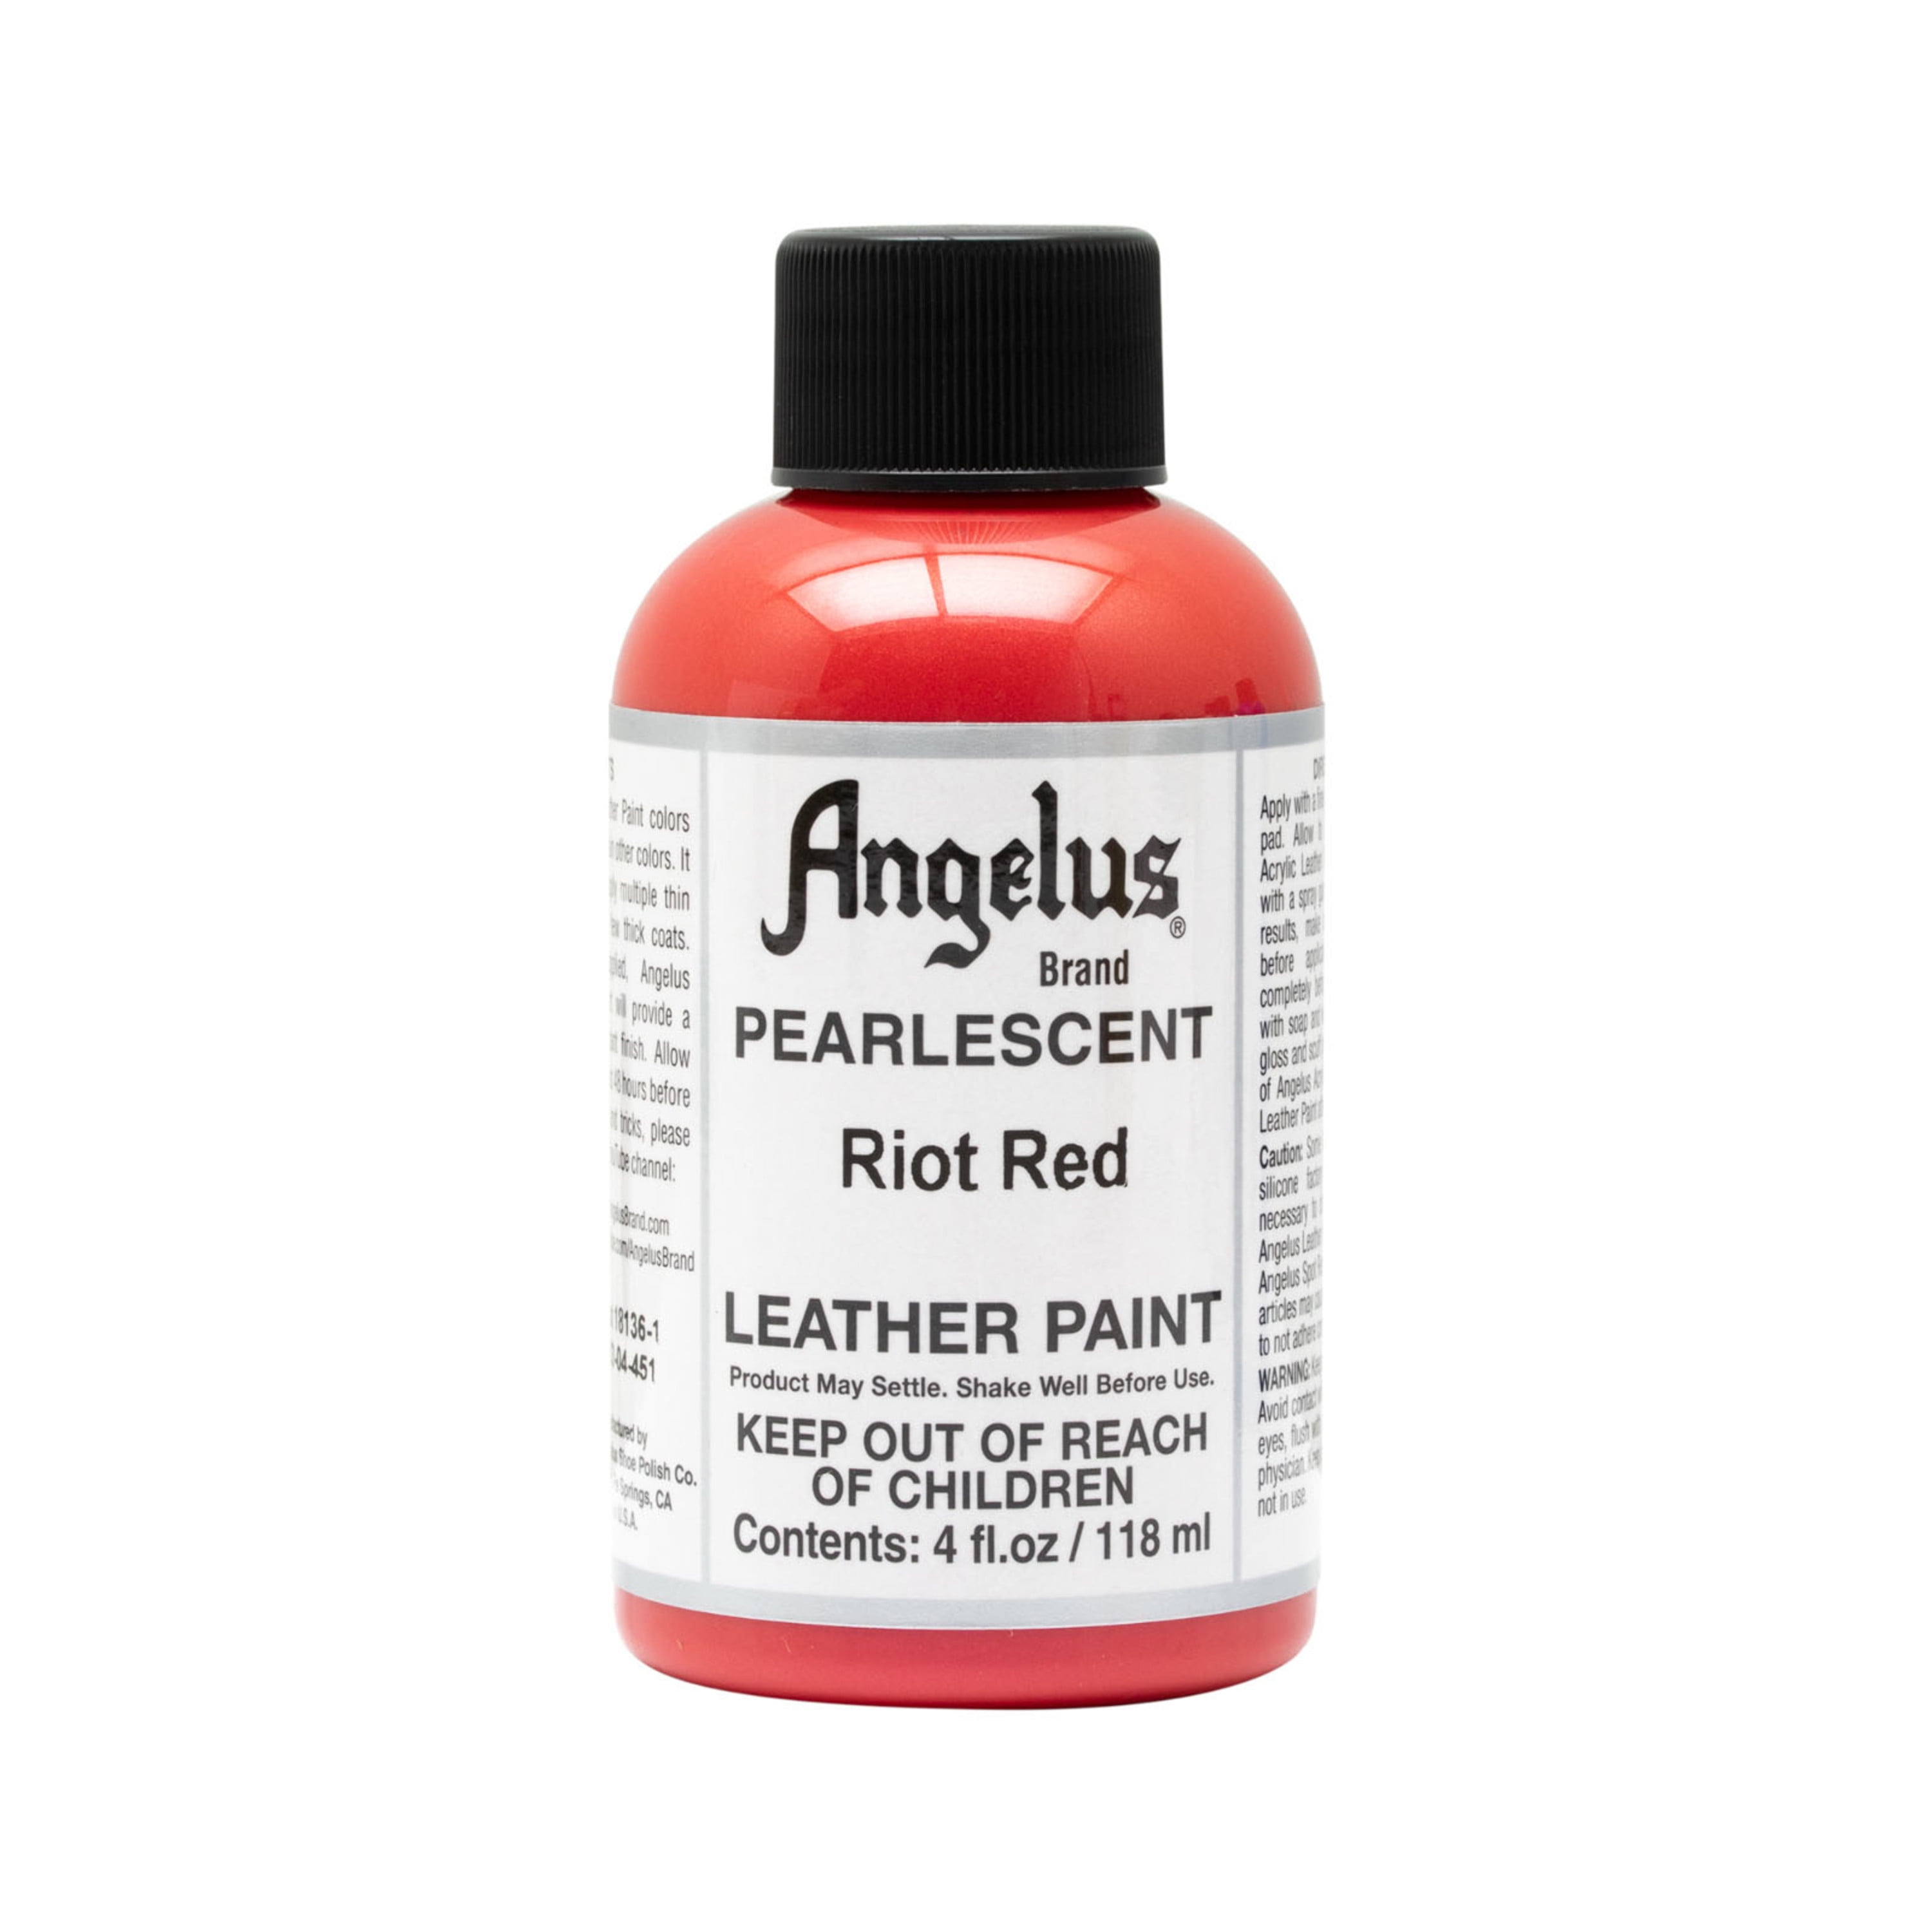 Angelus Pearlescent Leather Paint, Riot Red, 4oz for Customizing Shoes,  Boots, Jackets, Shirts, Sneakers, & More- Made in USA